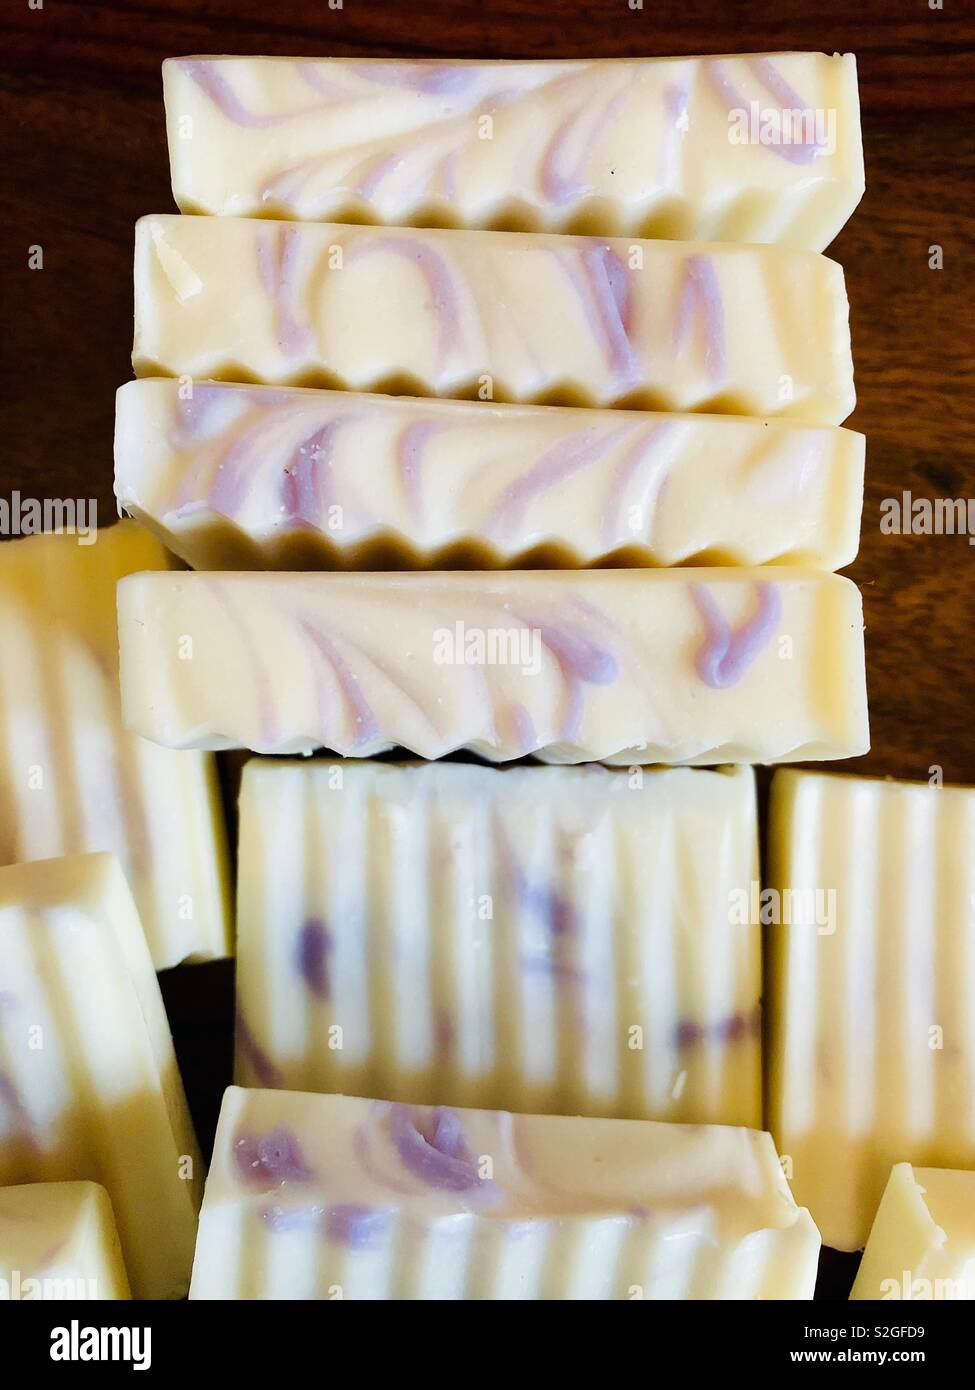 Handmade soap with lavender scent and purple swirls Stock Photo